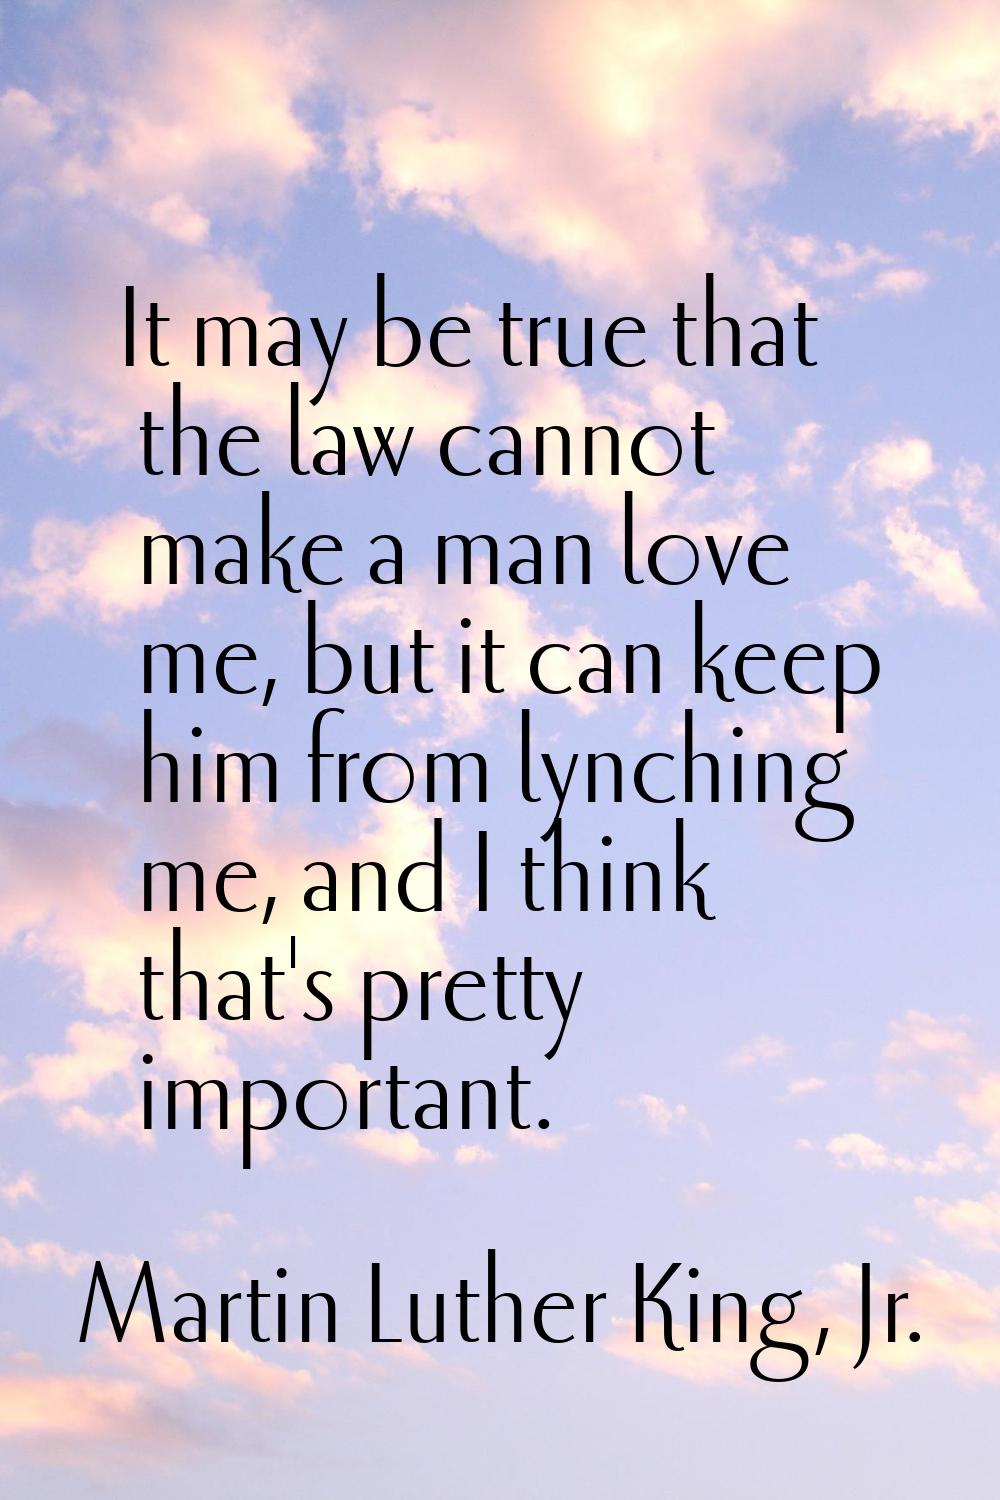 It may be true that the law cannot make a man love me, but it can keep him from lynching me, and I 